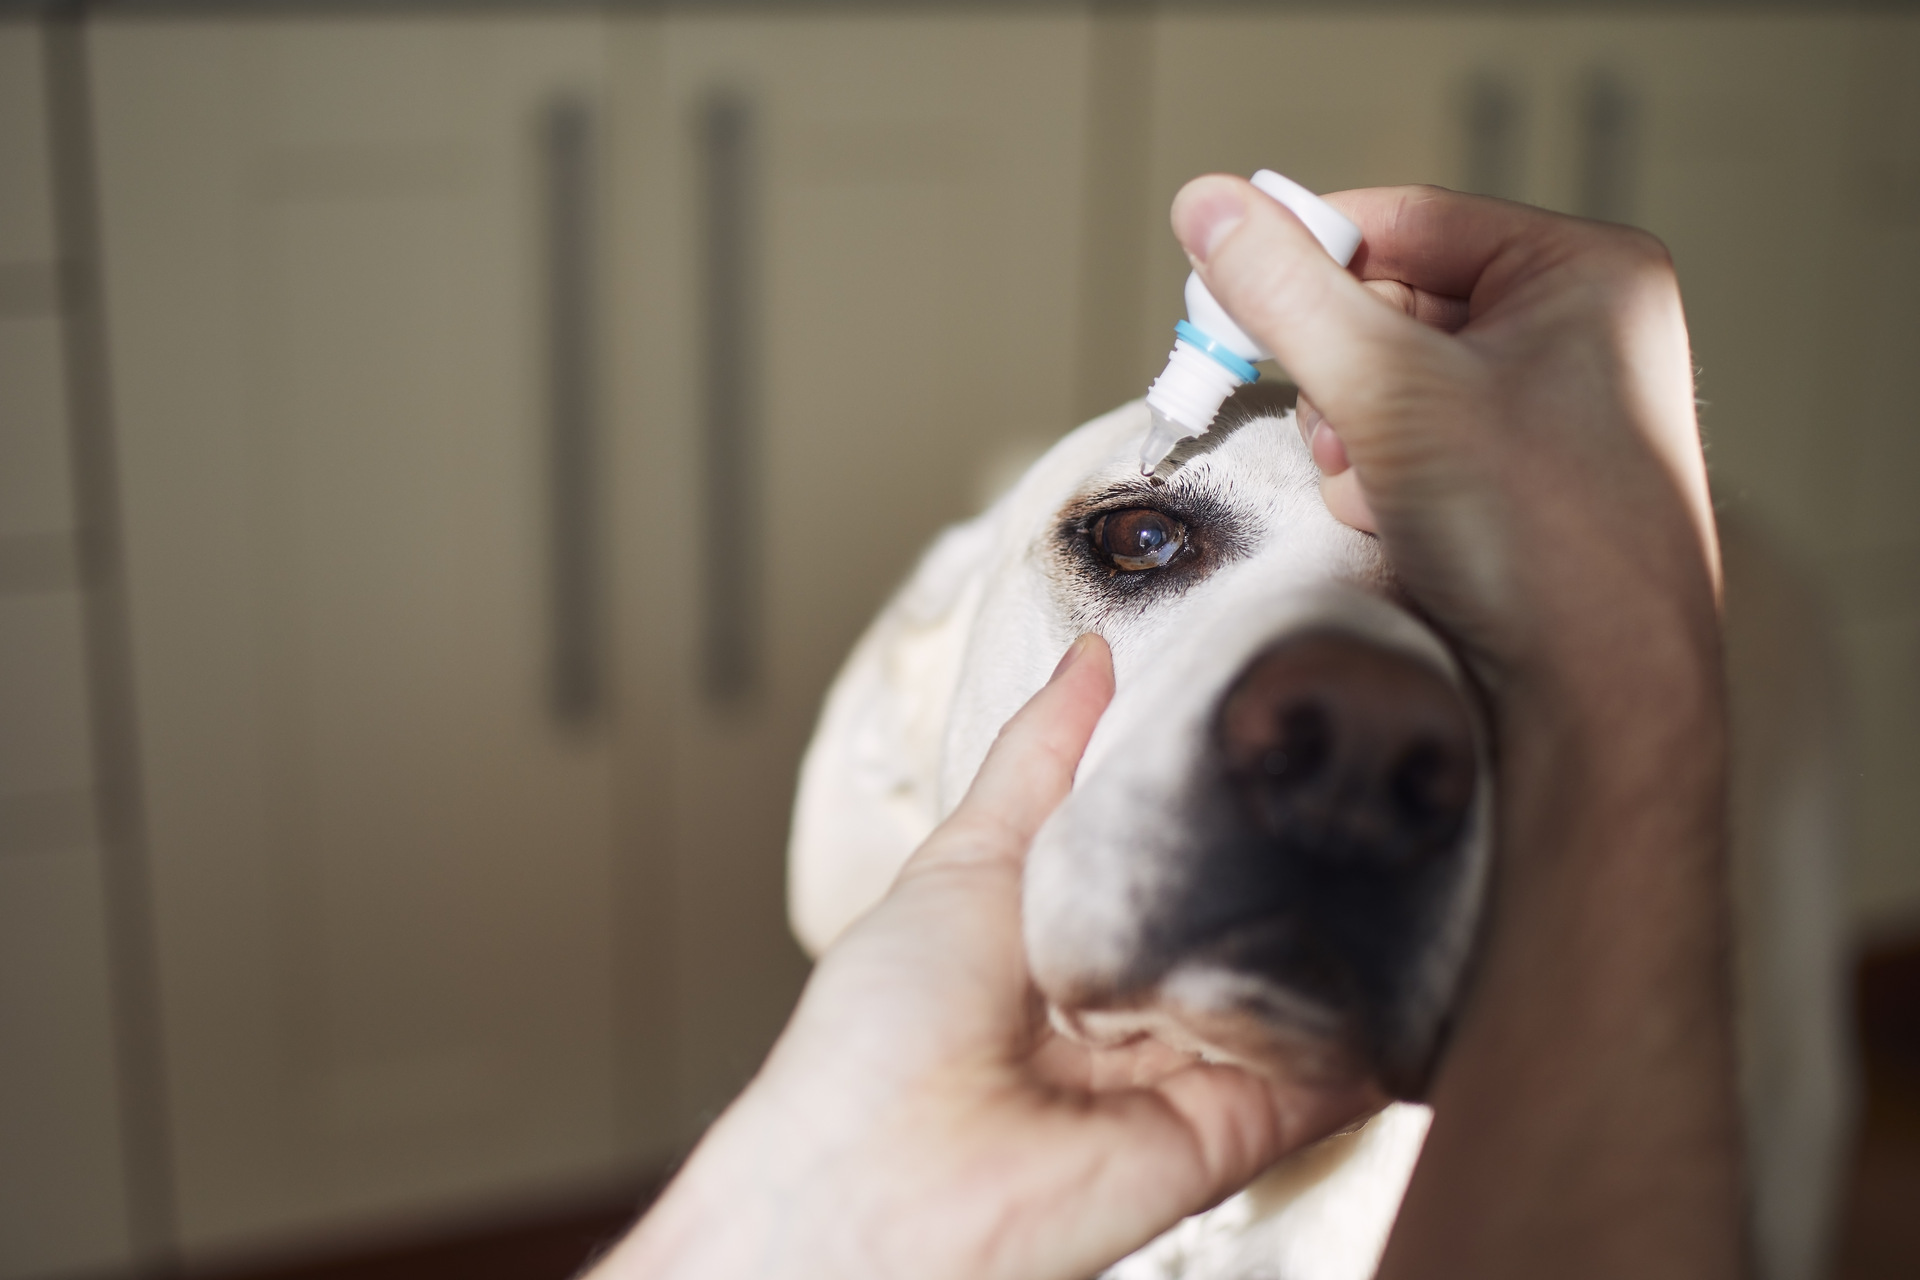 A woman administering eye drops to a senior dog